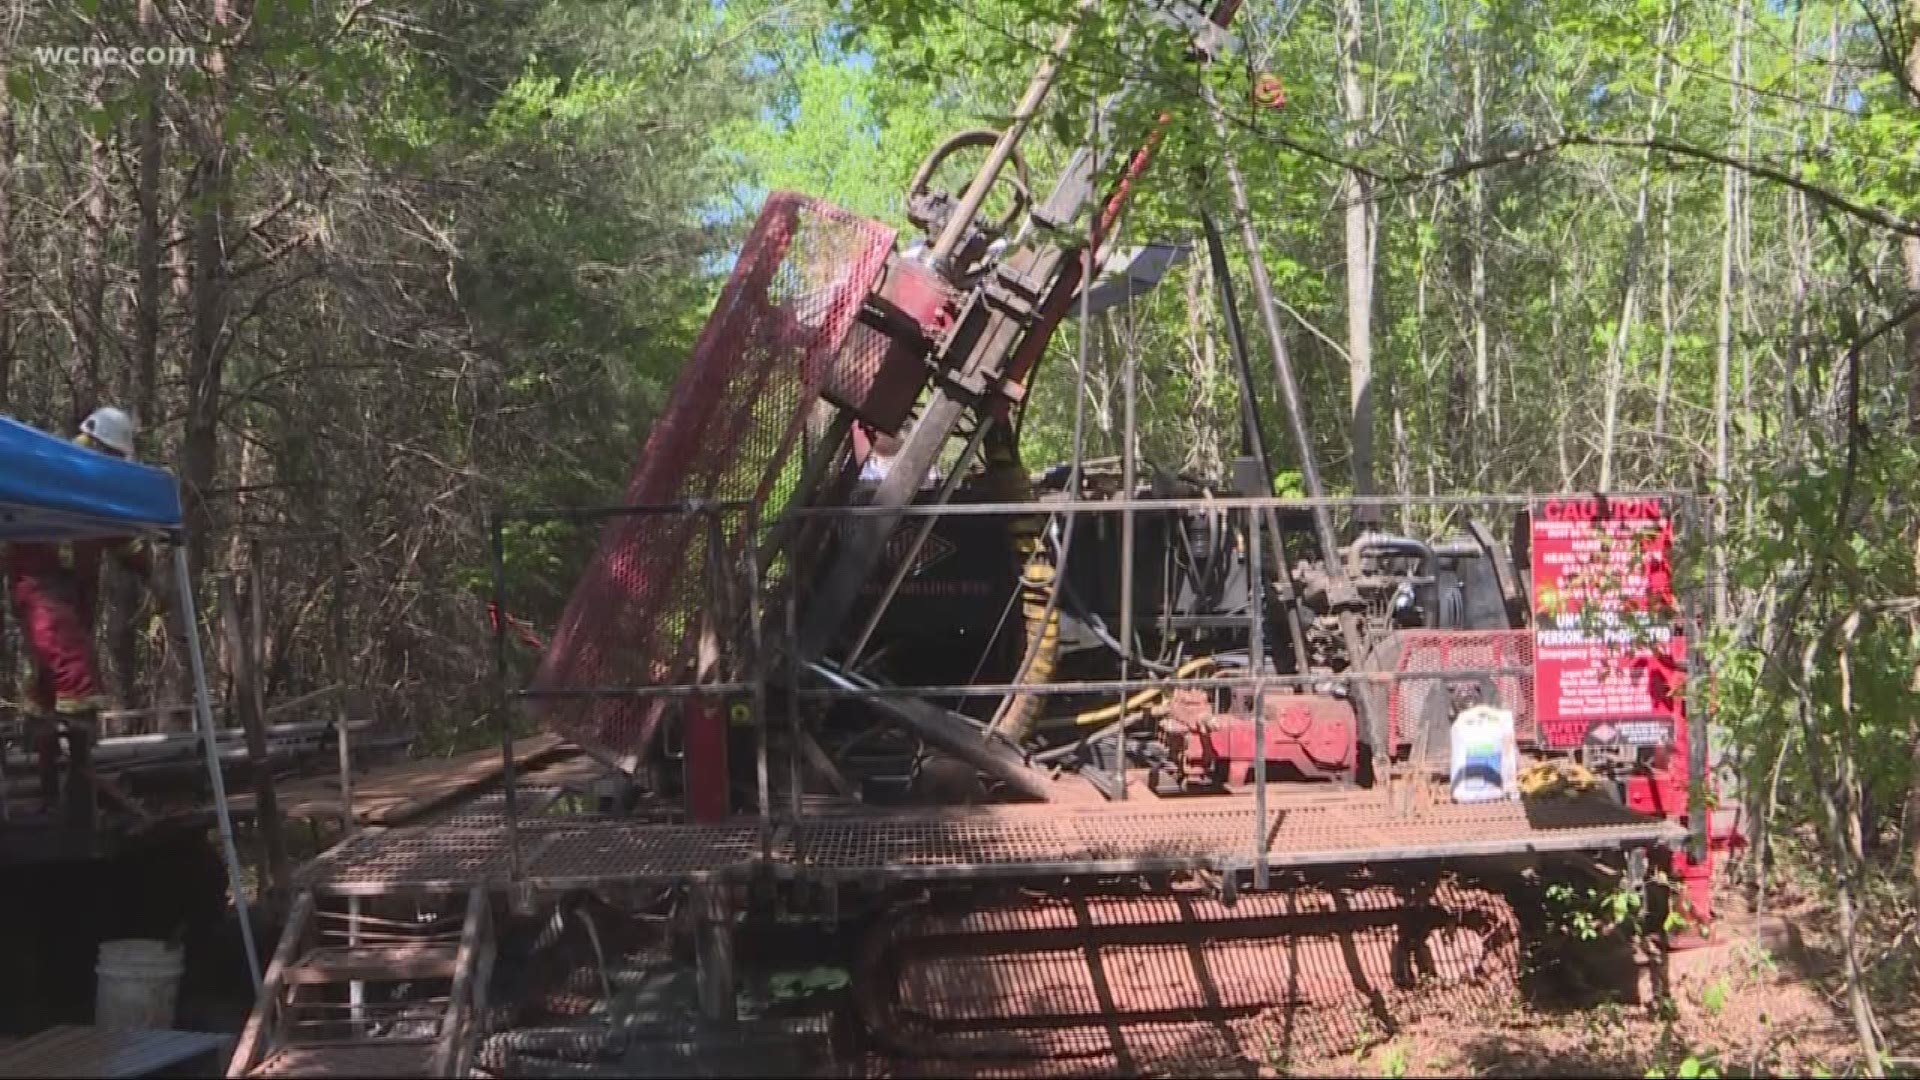 After more than two years of drilling and research, the company is in the process of getting permits to construct an open pit mine in Gaston County --investing $130 million and creating 100-150 jobs.